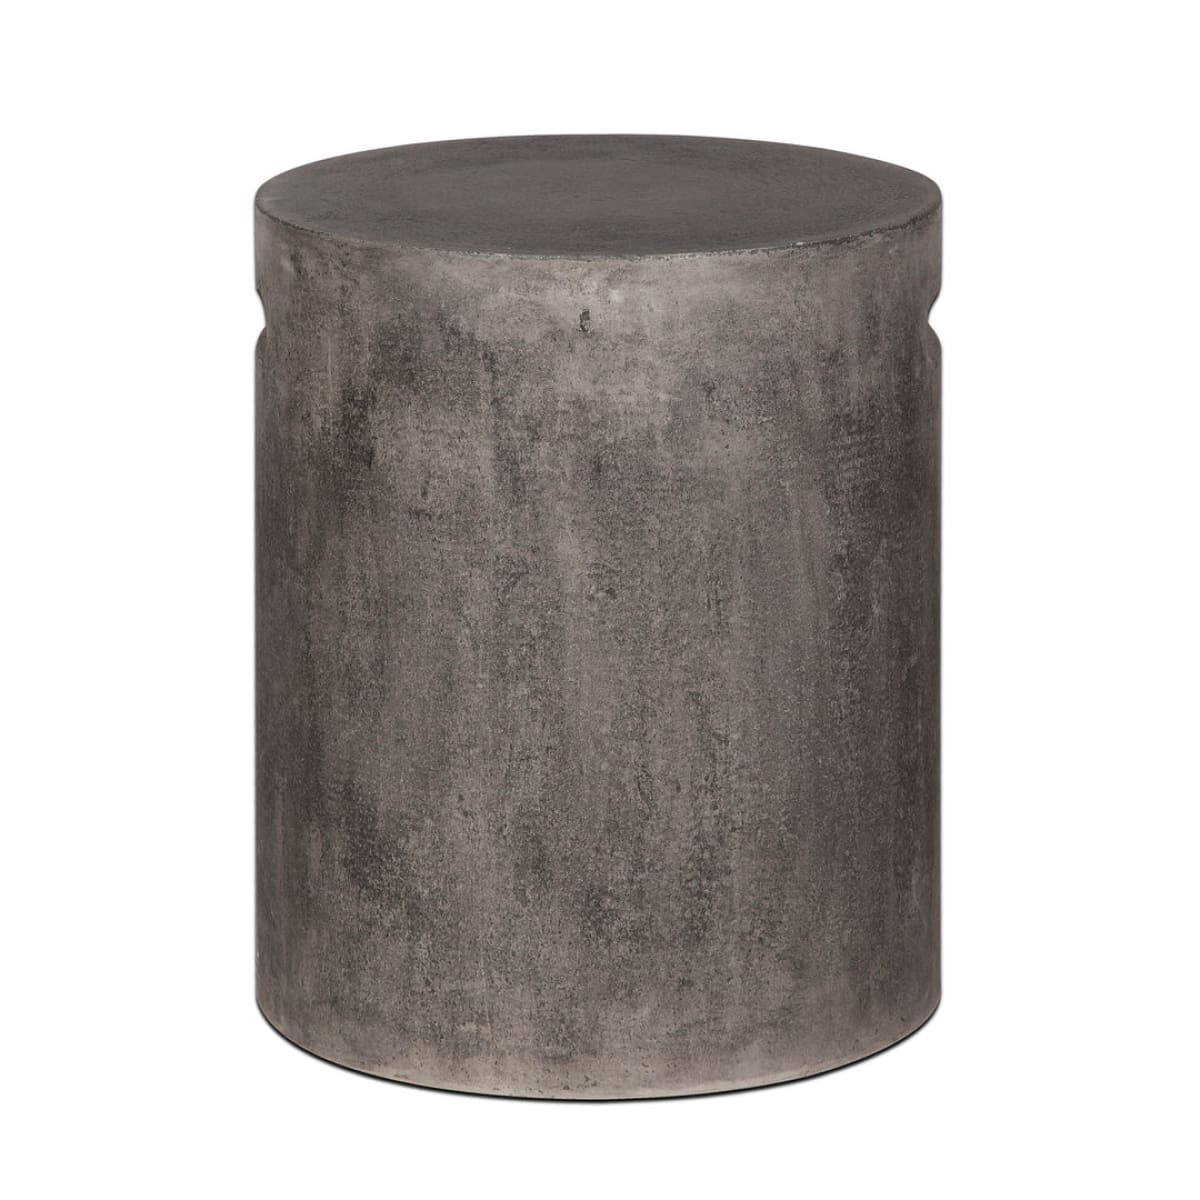 Concrete Round Side Table With Handle - Dark Grey - lh-import-side-tables